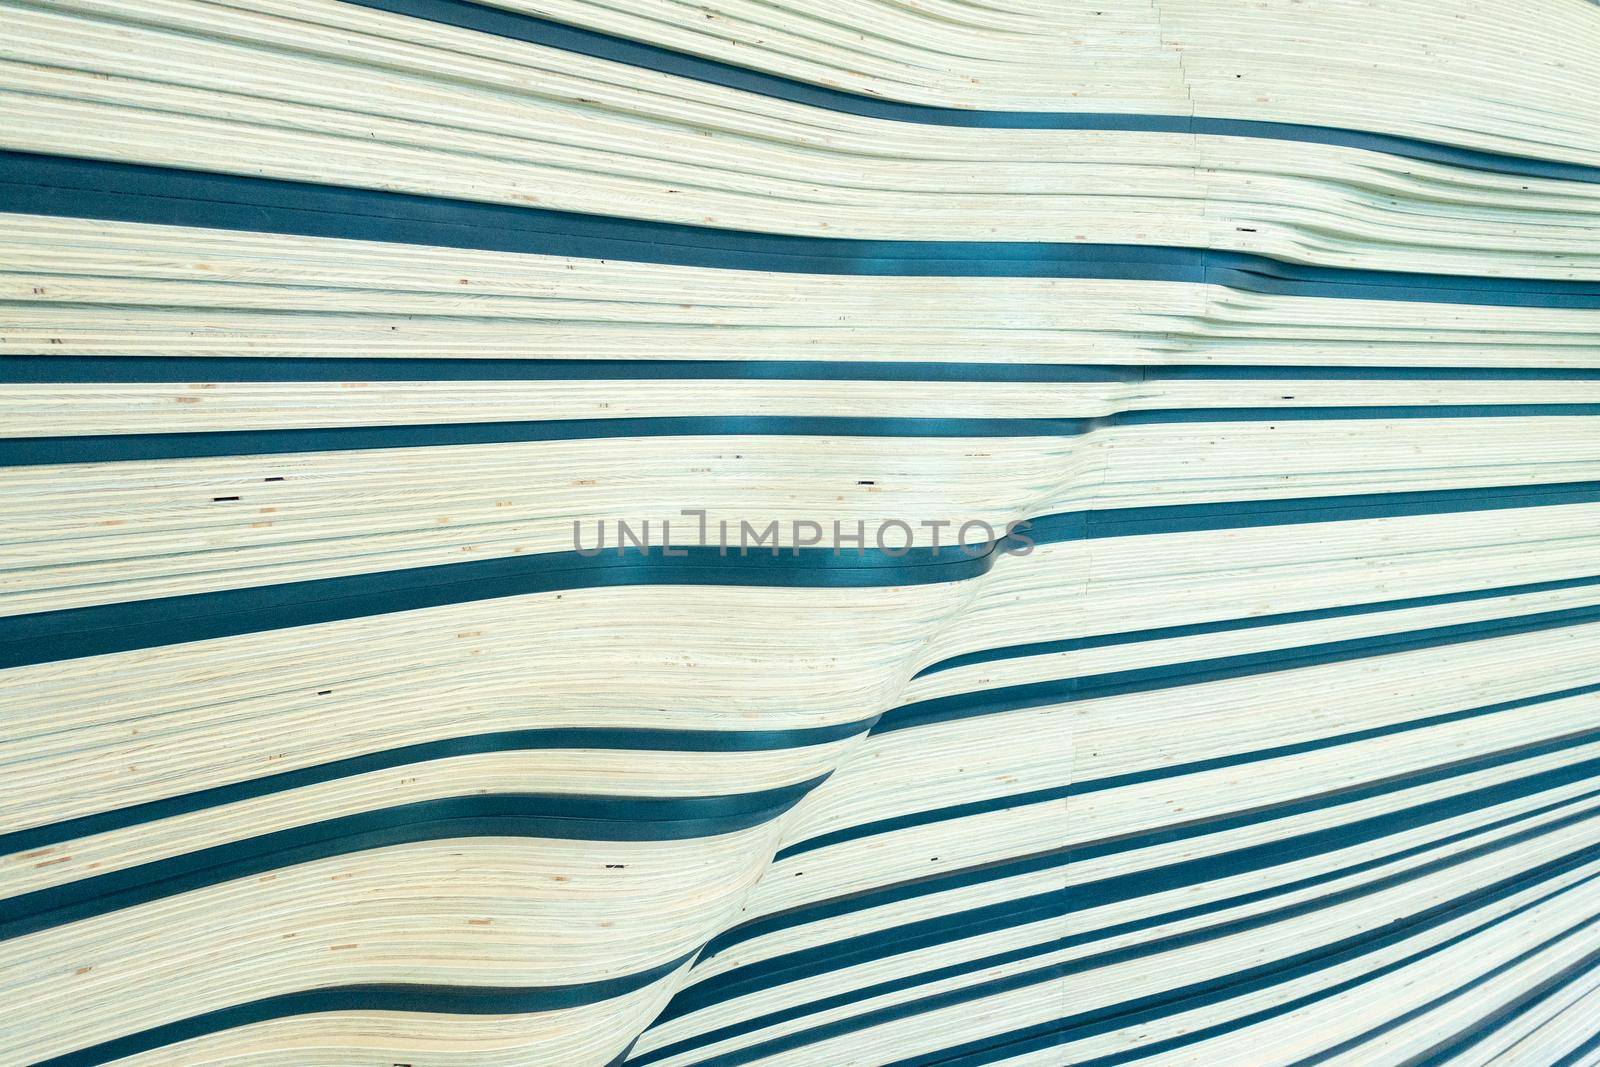 Wall structure of wood with wave pattern in horizontal lines by LeoniekvanderVliet